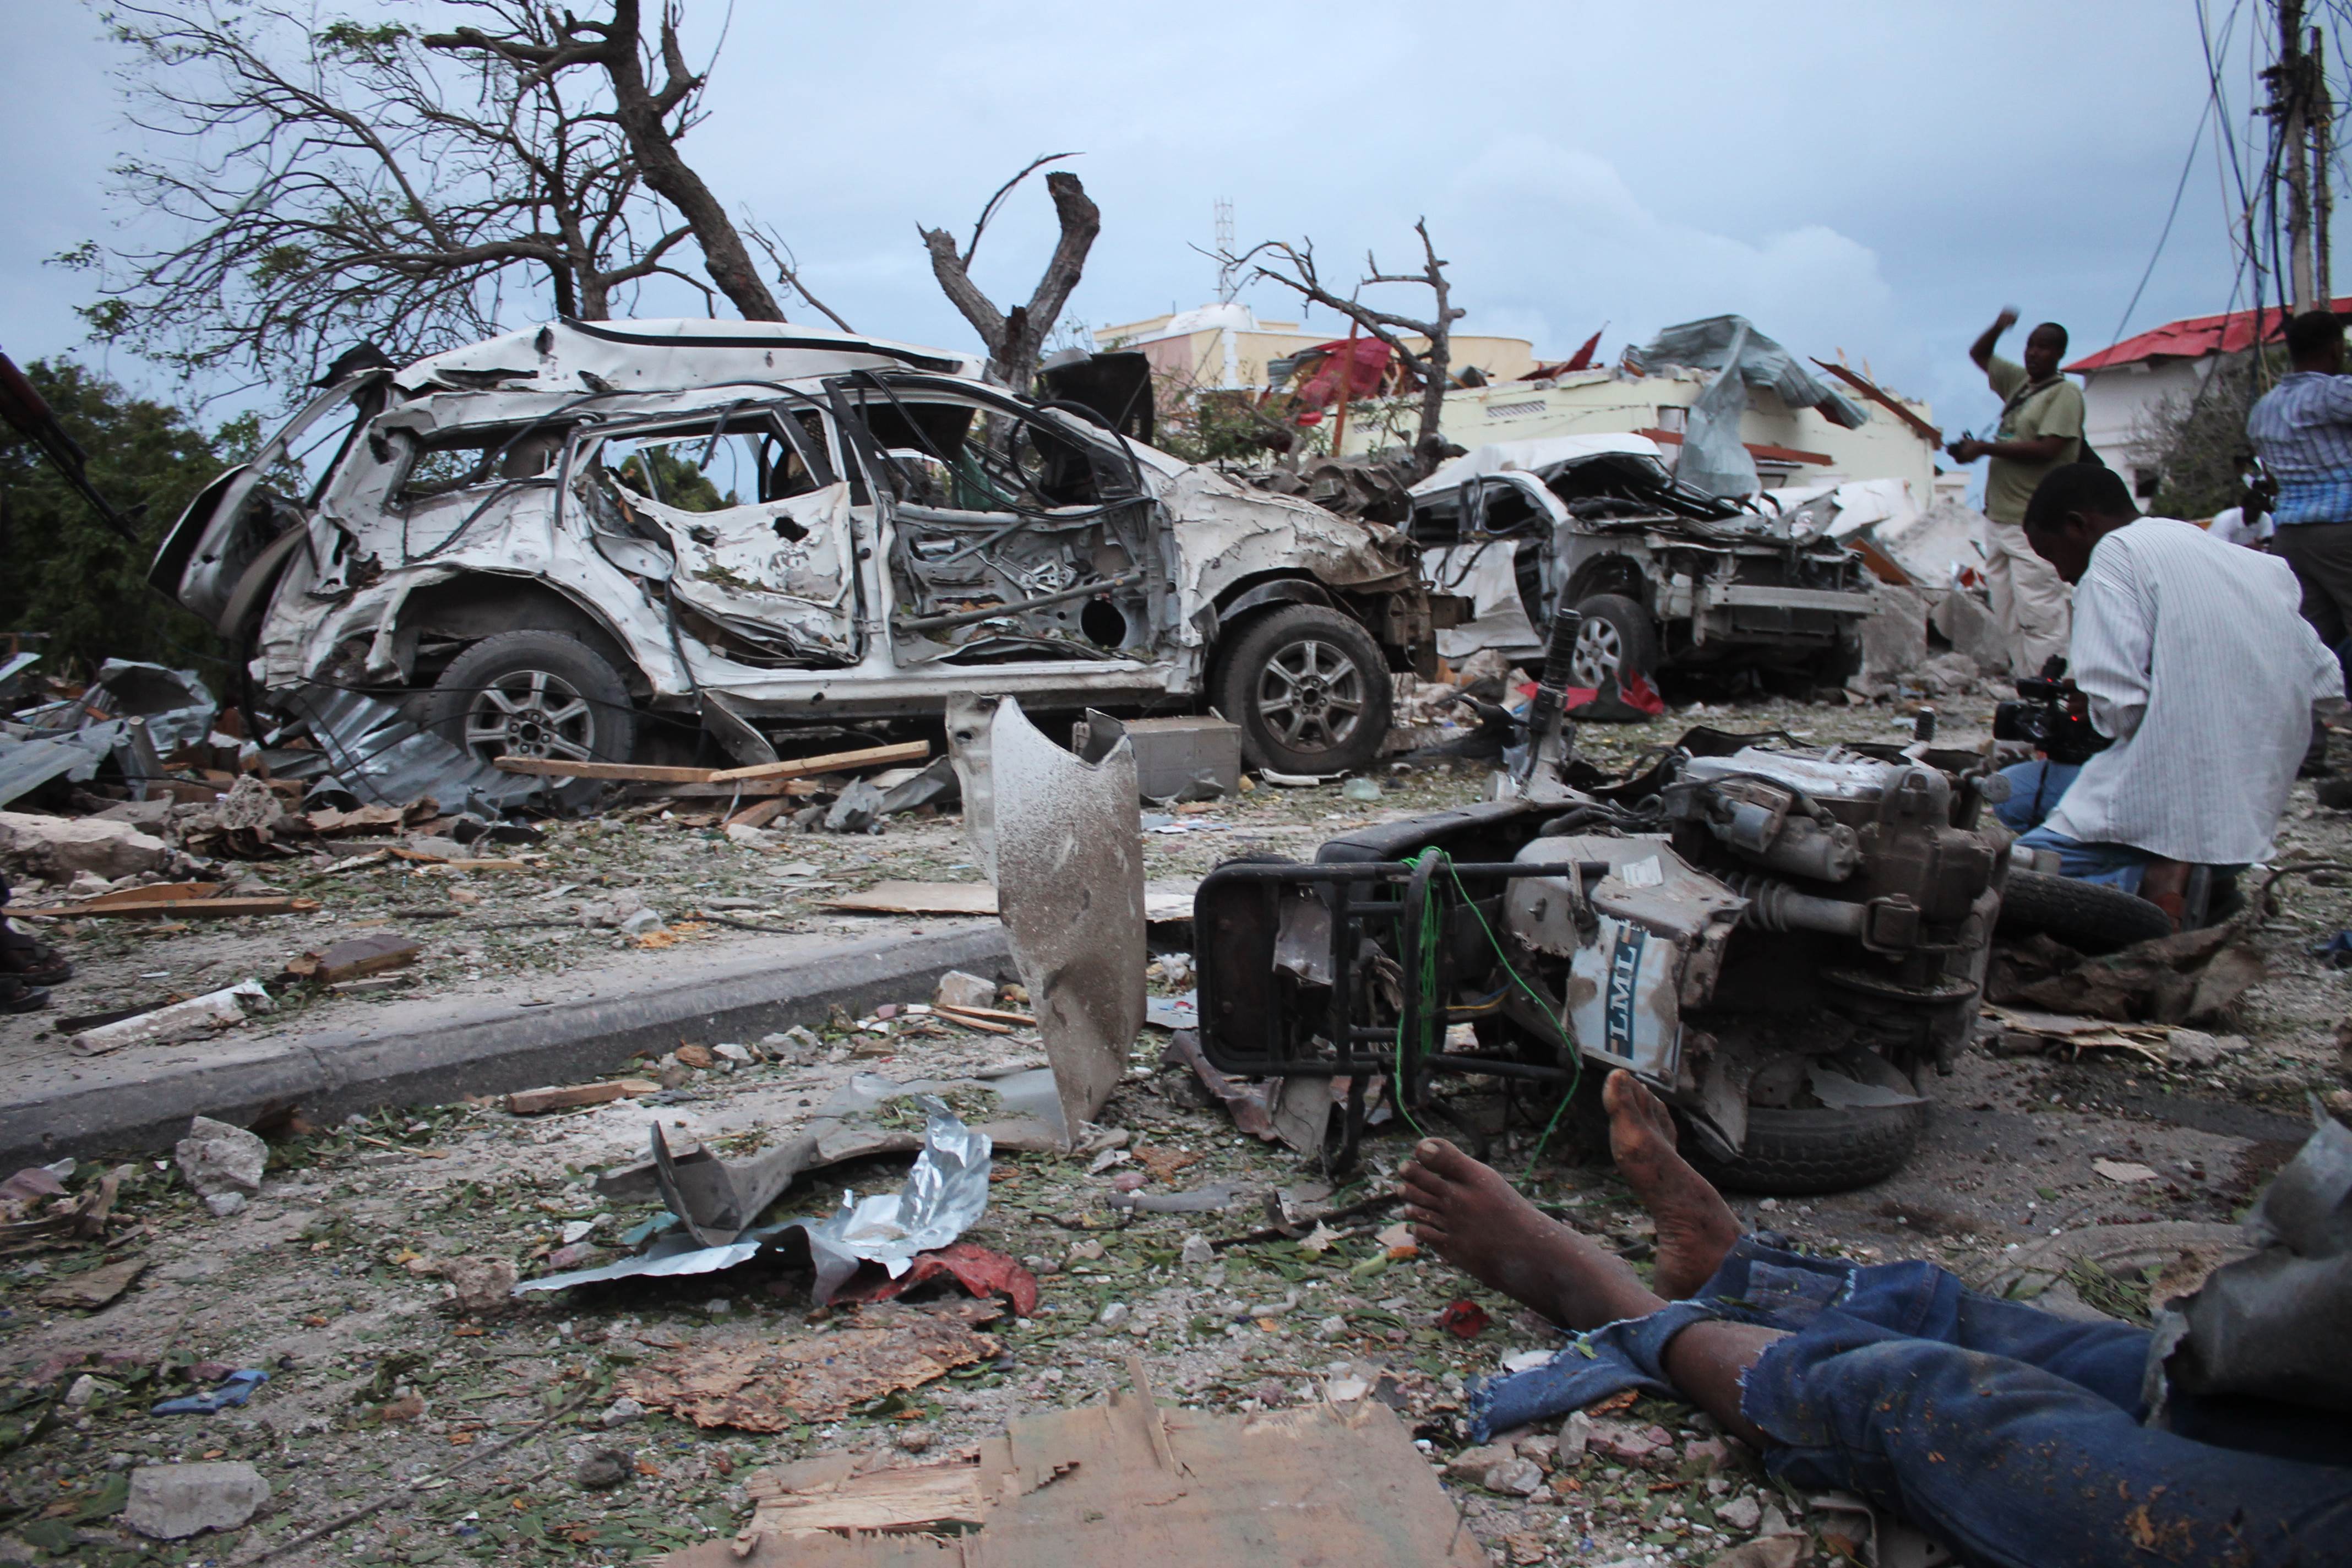 A body lies in the rubble next to damaged cars near the Jazeera Palace hotel following a suicide attack in Mogadishu. Photo: AFP